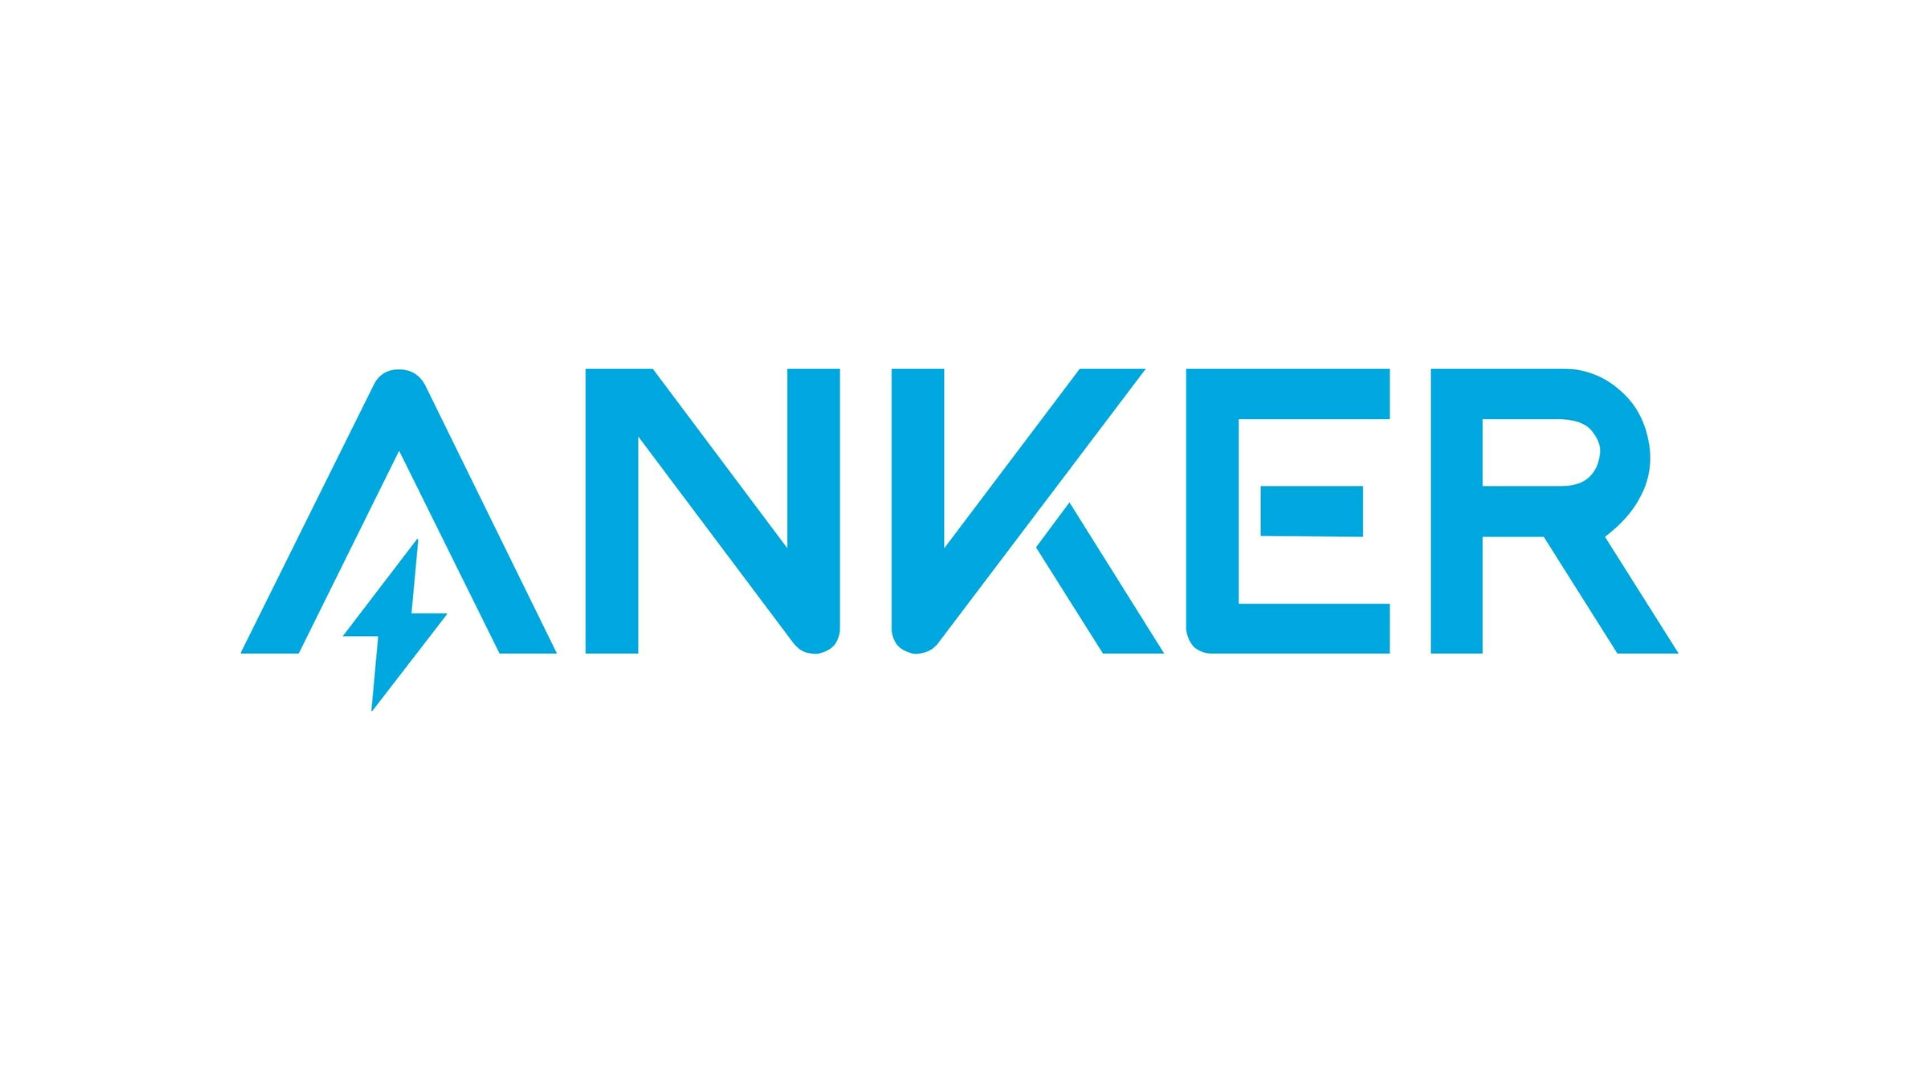 Anker Innovations unveiled new products at CES 2023 including the AnkerMake M5 3D Printer which was selected as an Innovation Award Honoree.